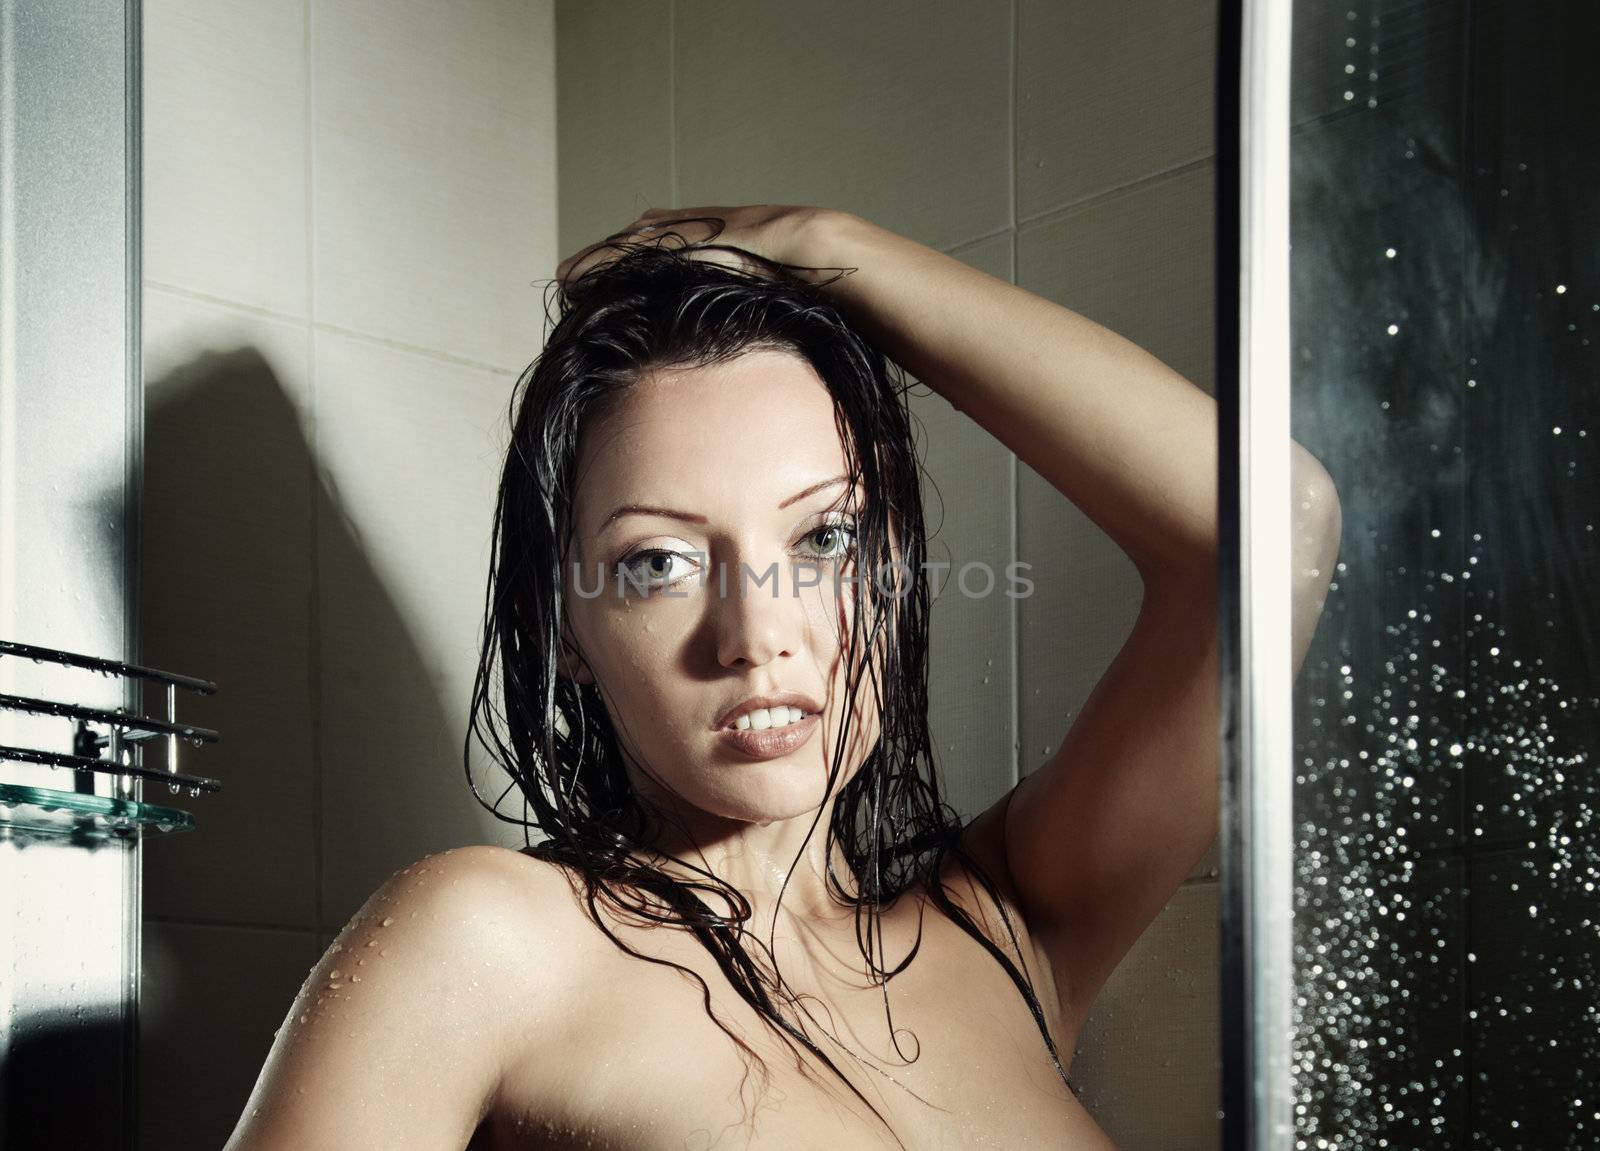 Beauty in the bath by Novic